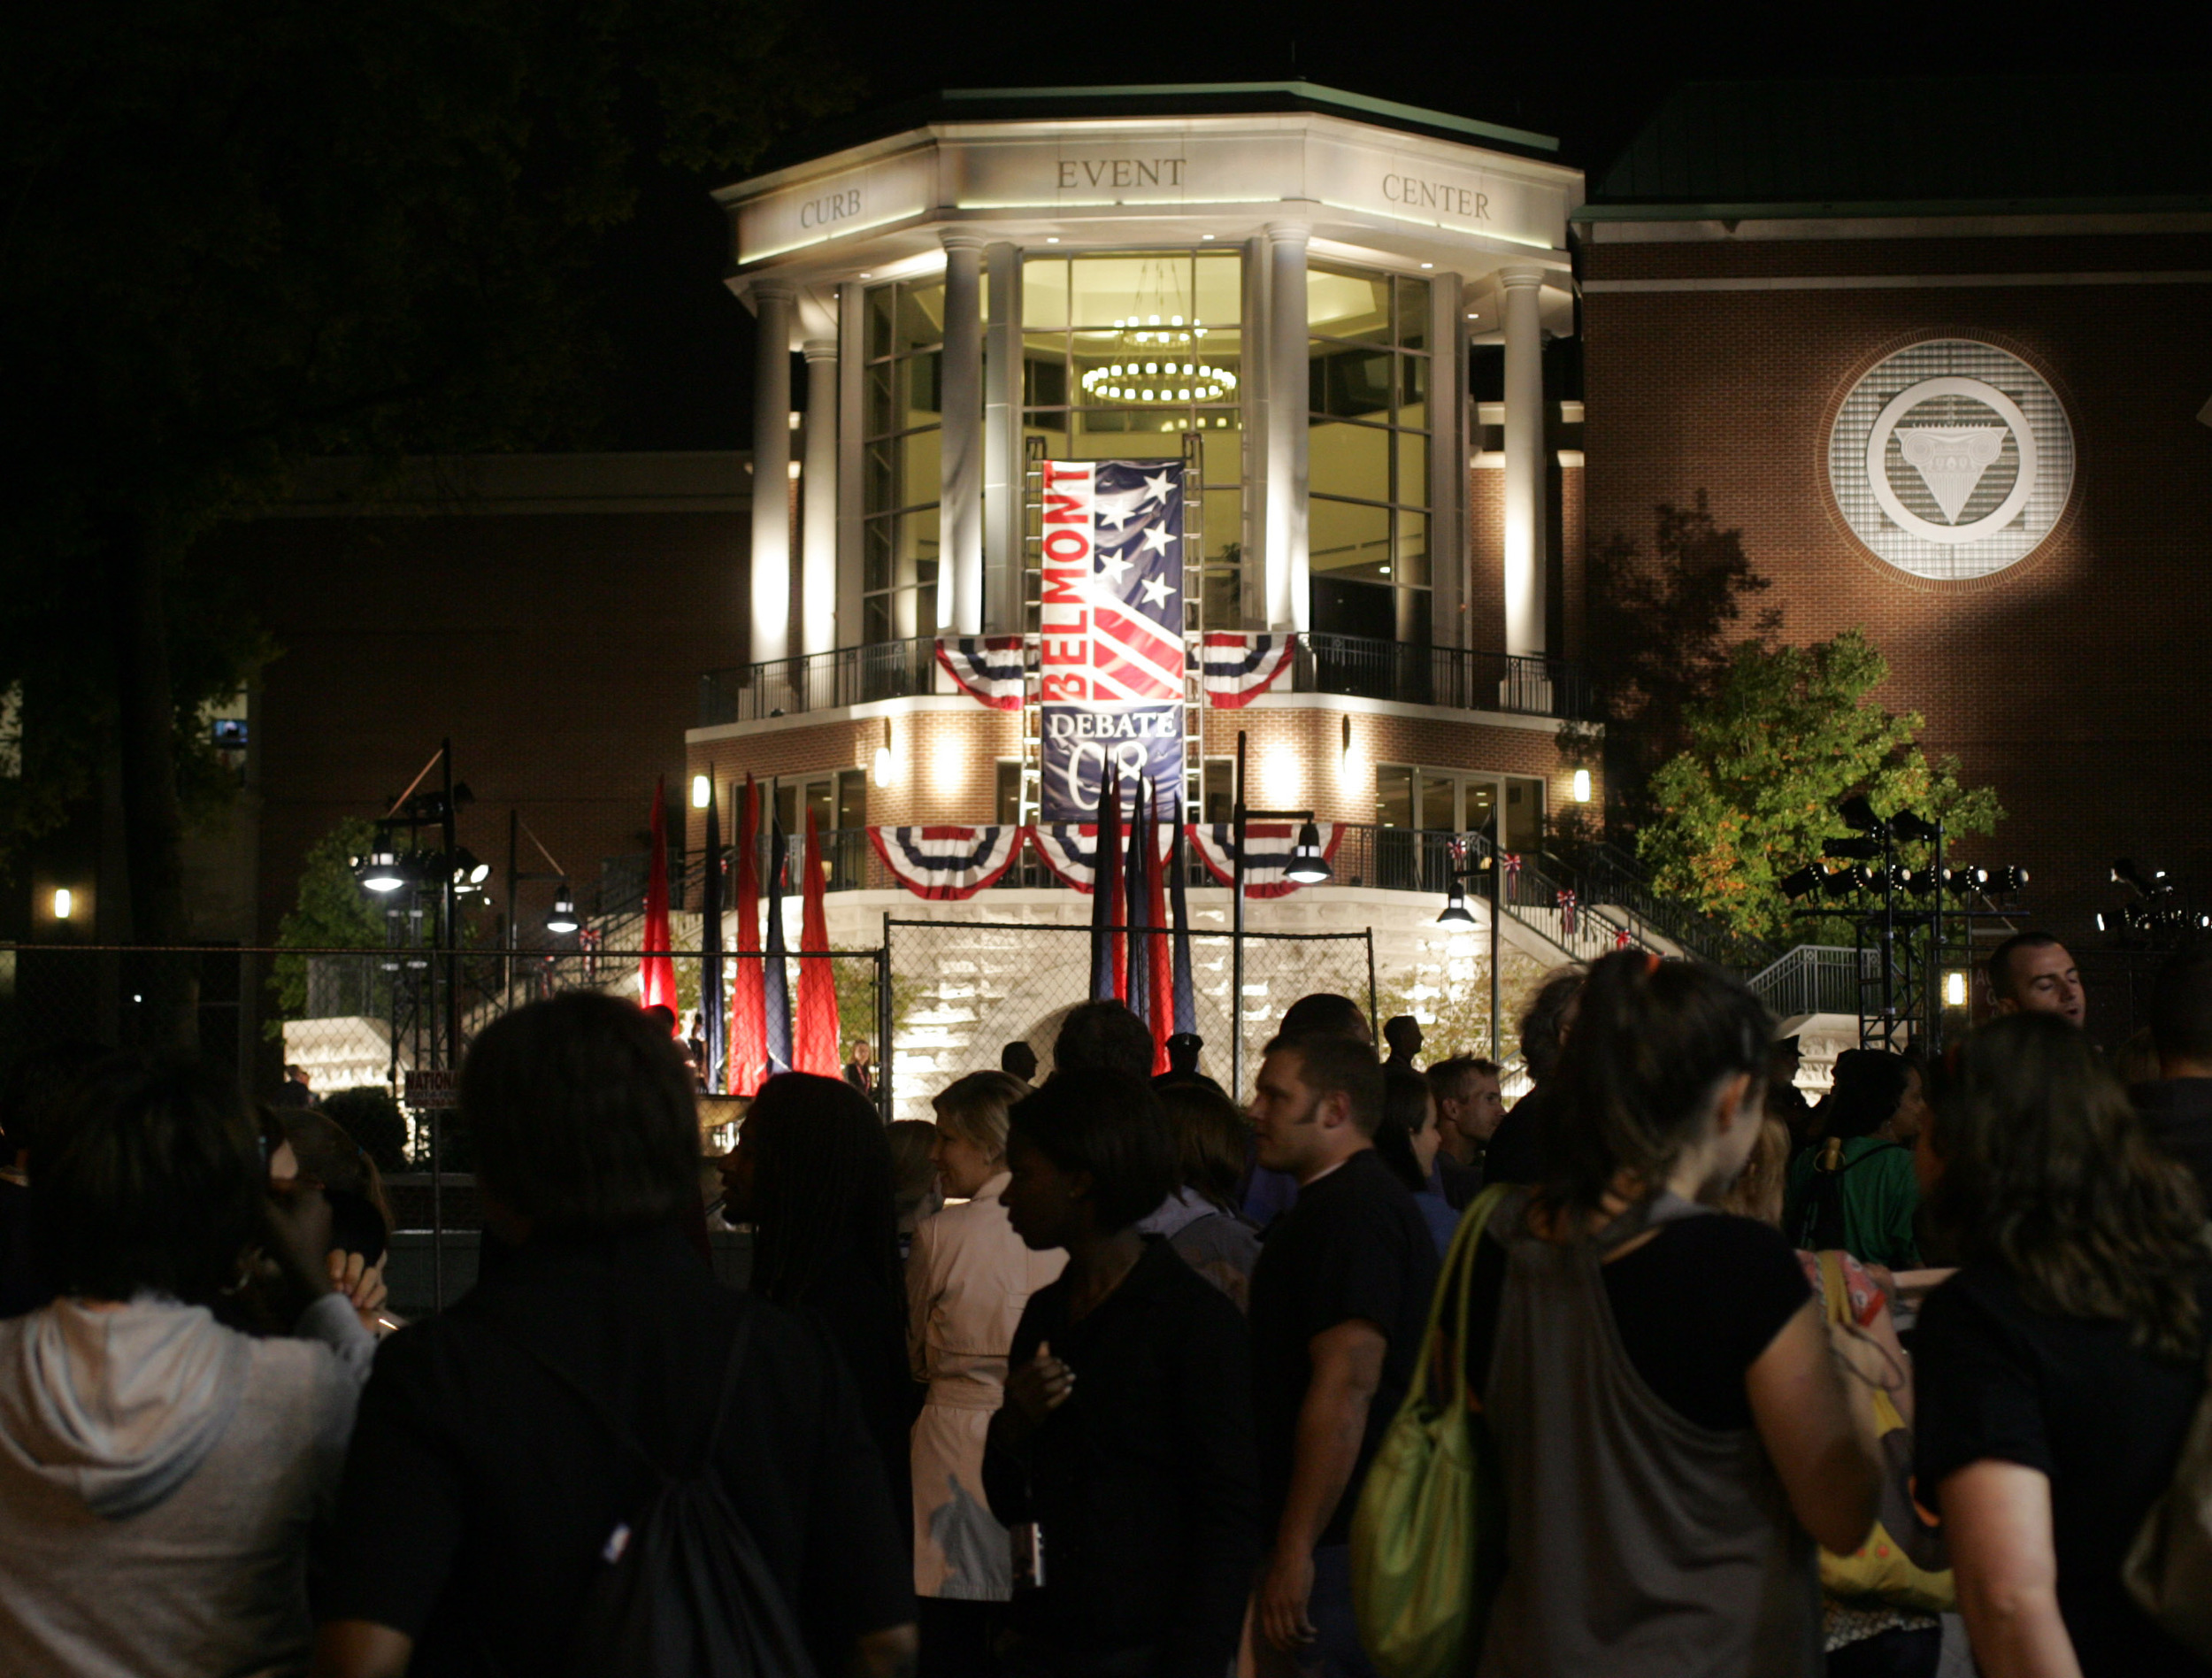  People outside the town hall debate at Belmont University Tuesday, October 7, 2008 in Nashville, Tennessee. 